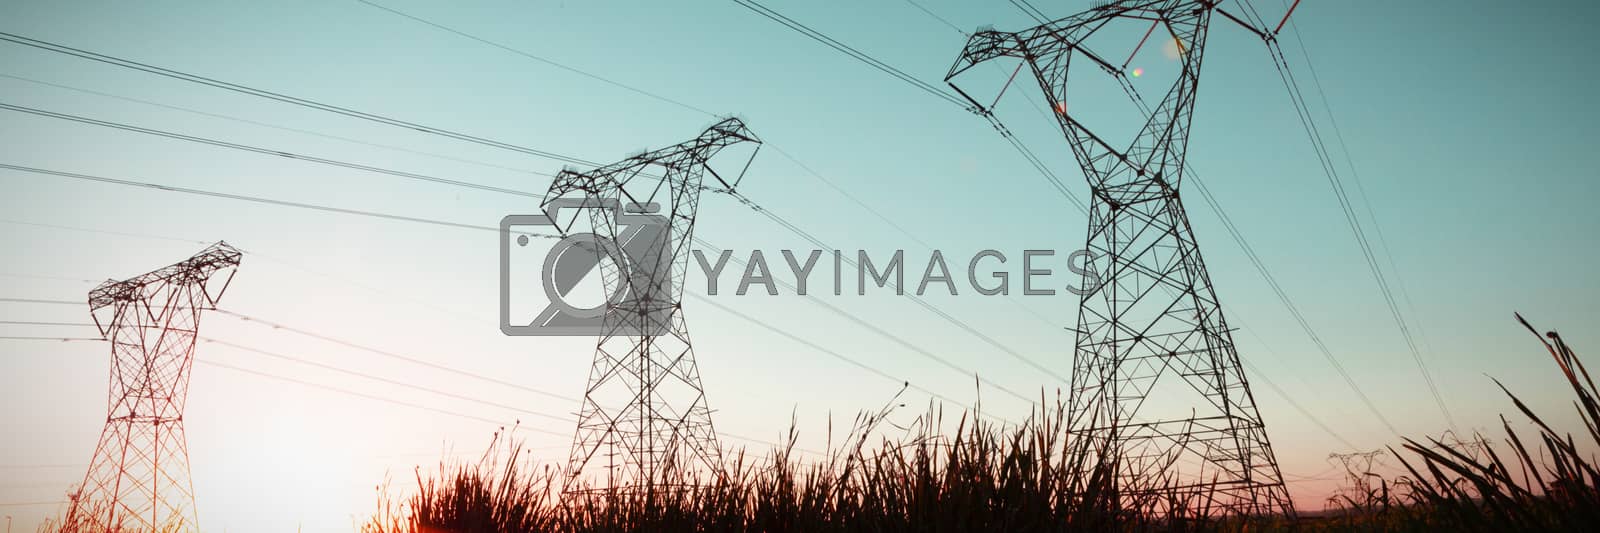 Royalty free image of The evening electricity pylon silhouette by Wavebreakmedia